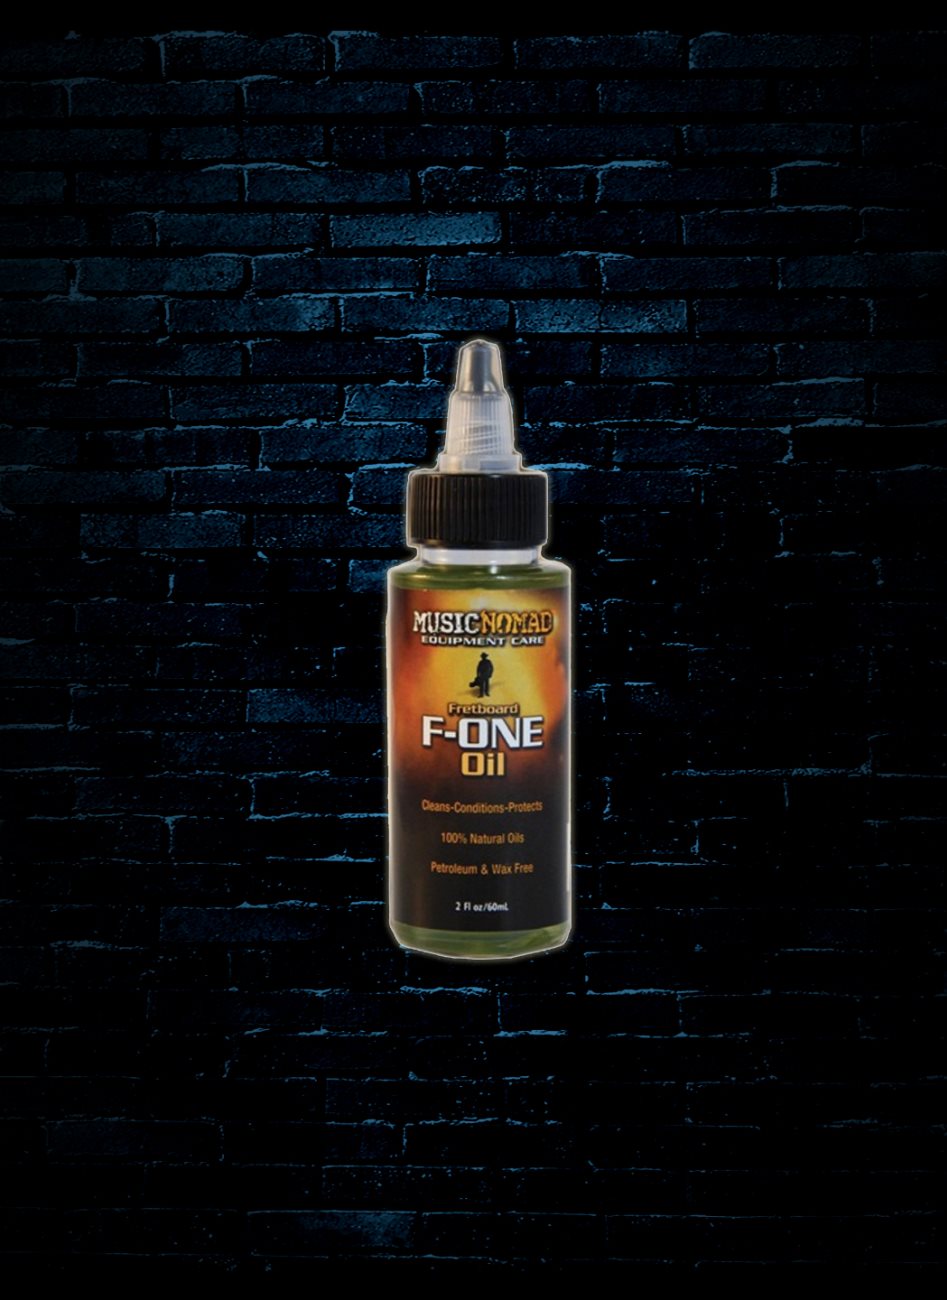 Music Nomad F-ONE Oil Fretboard Cleaner